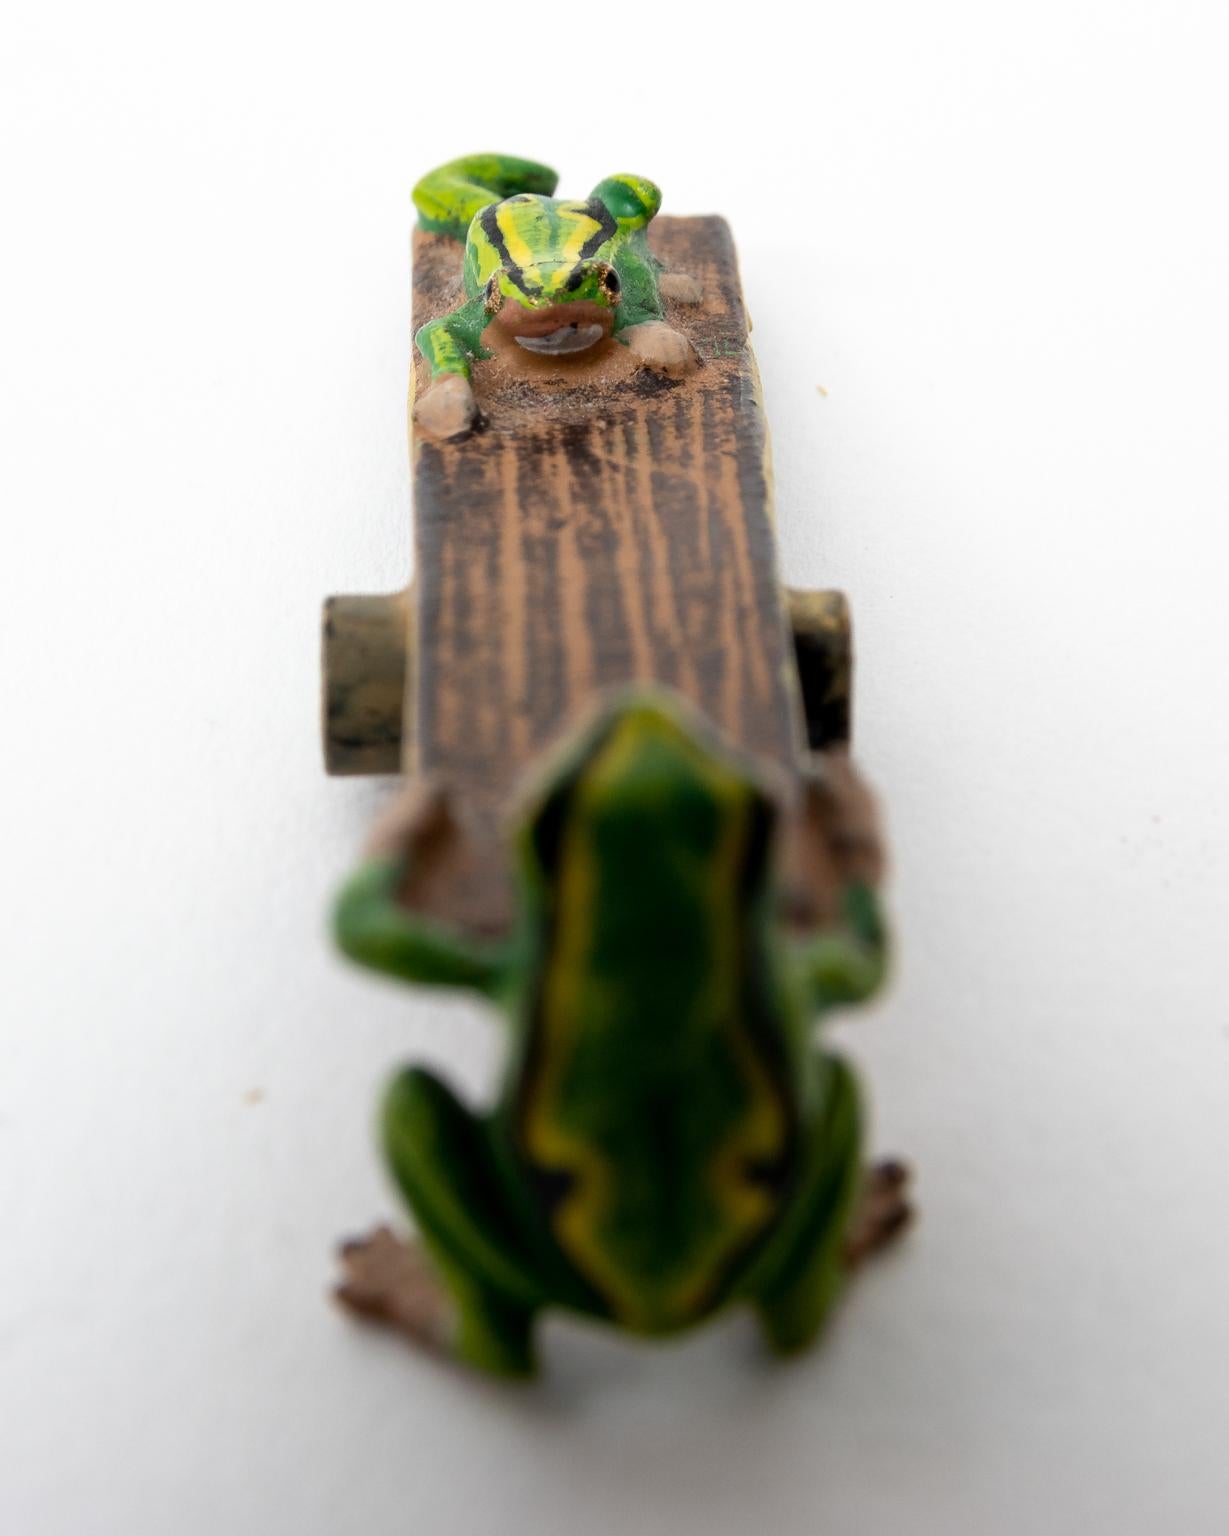 Circa early 20th century cold painted bronze figurines of frogs on seesaw by Franz Bergman. The figurines are signed 